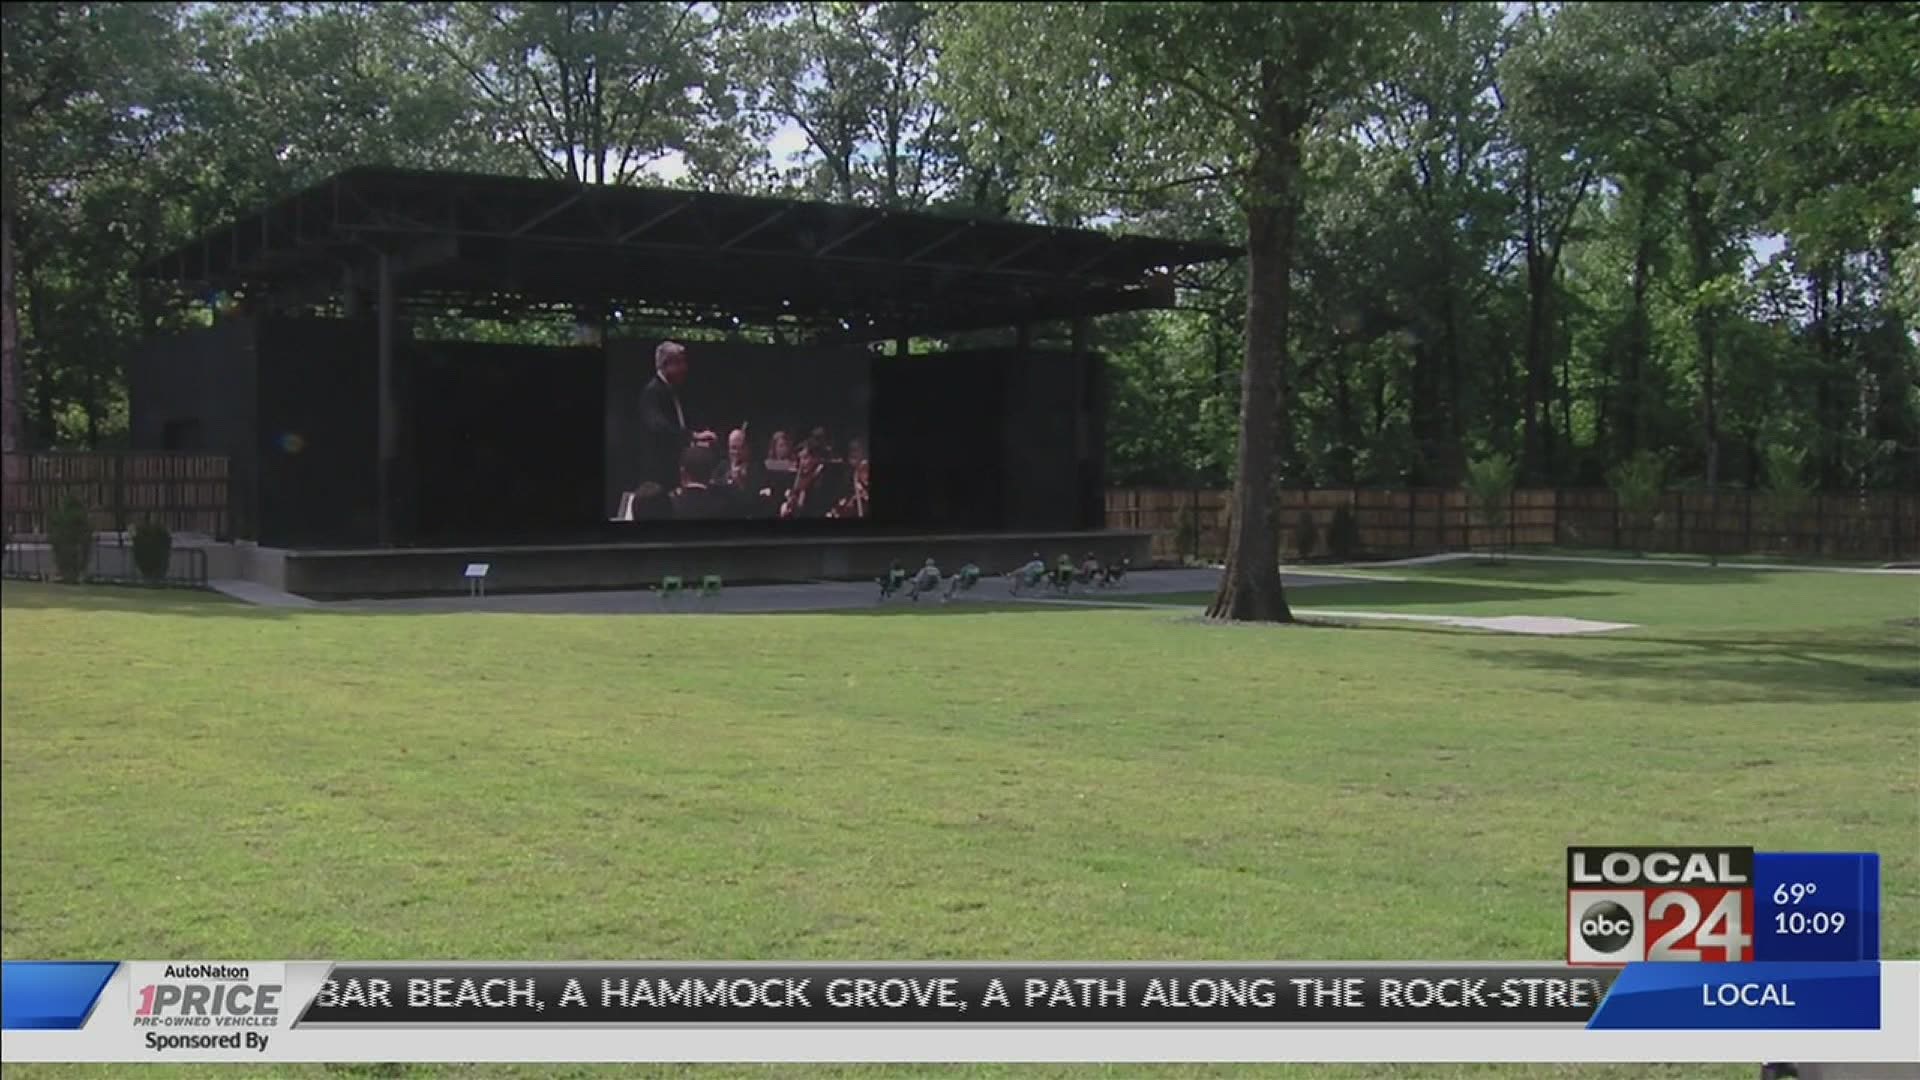 The Grove will host many types of performances, including theater, dance, orchestras, and every genre of music.